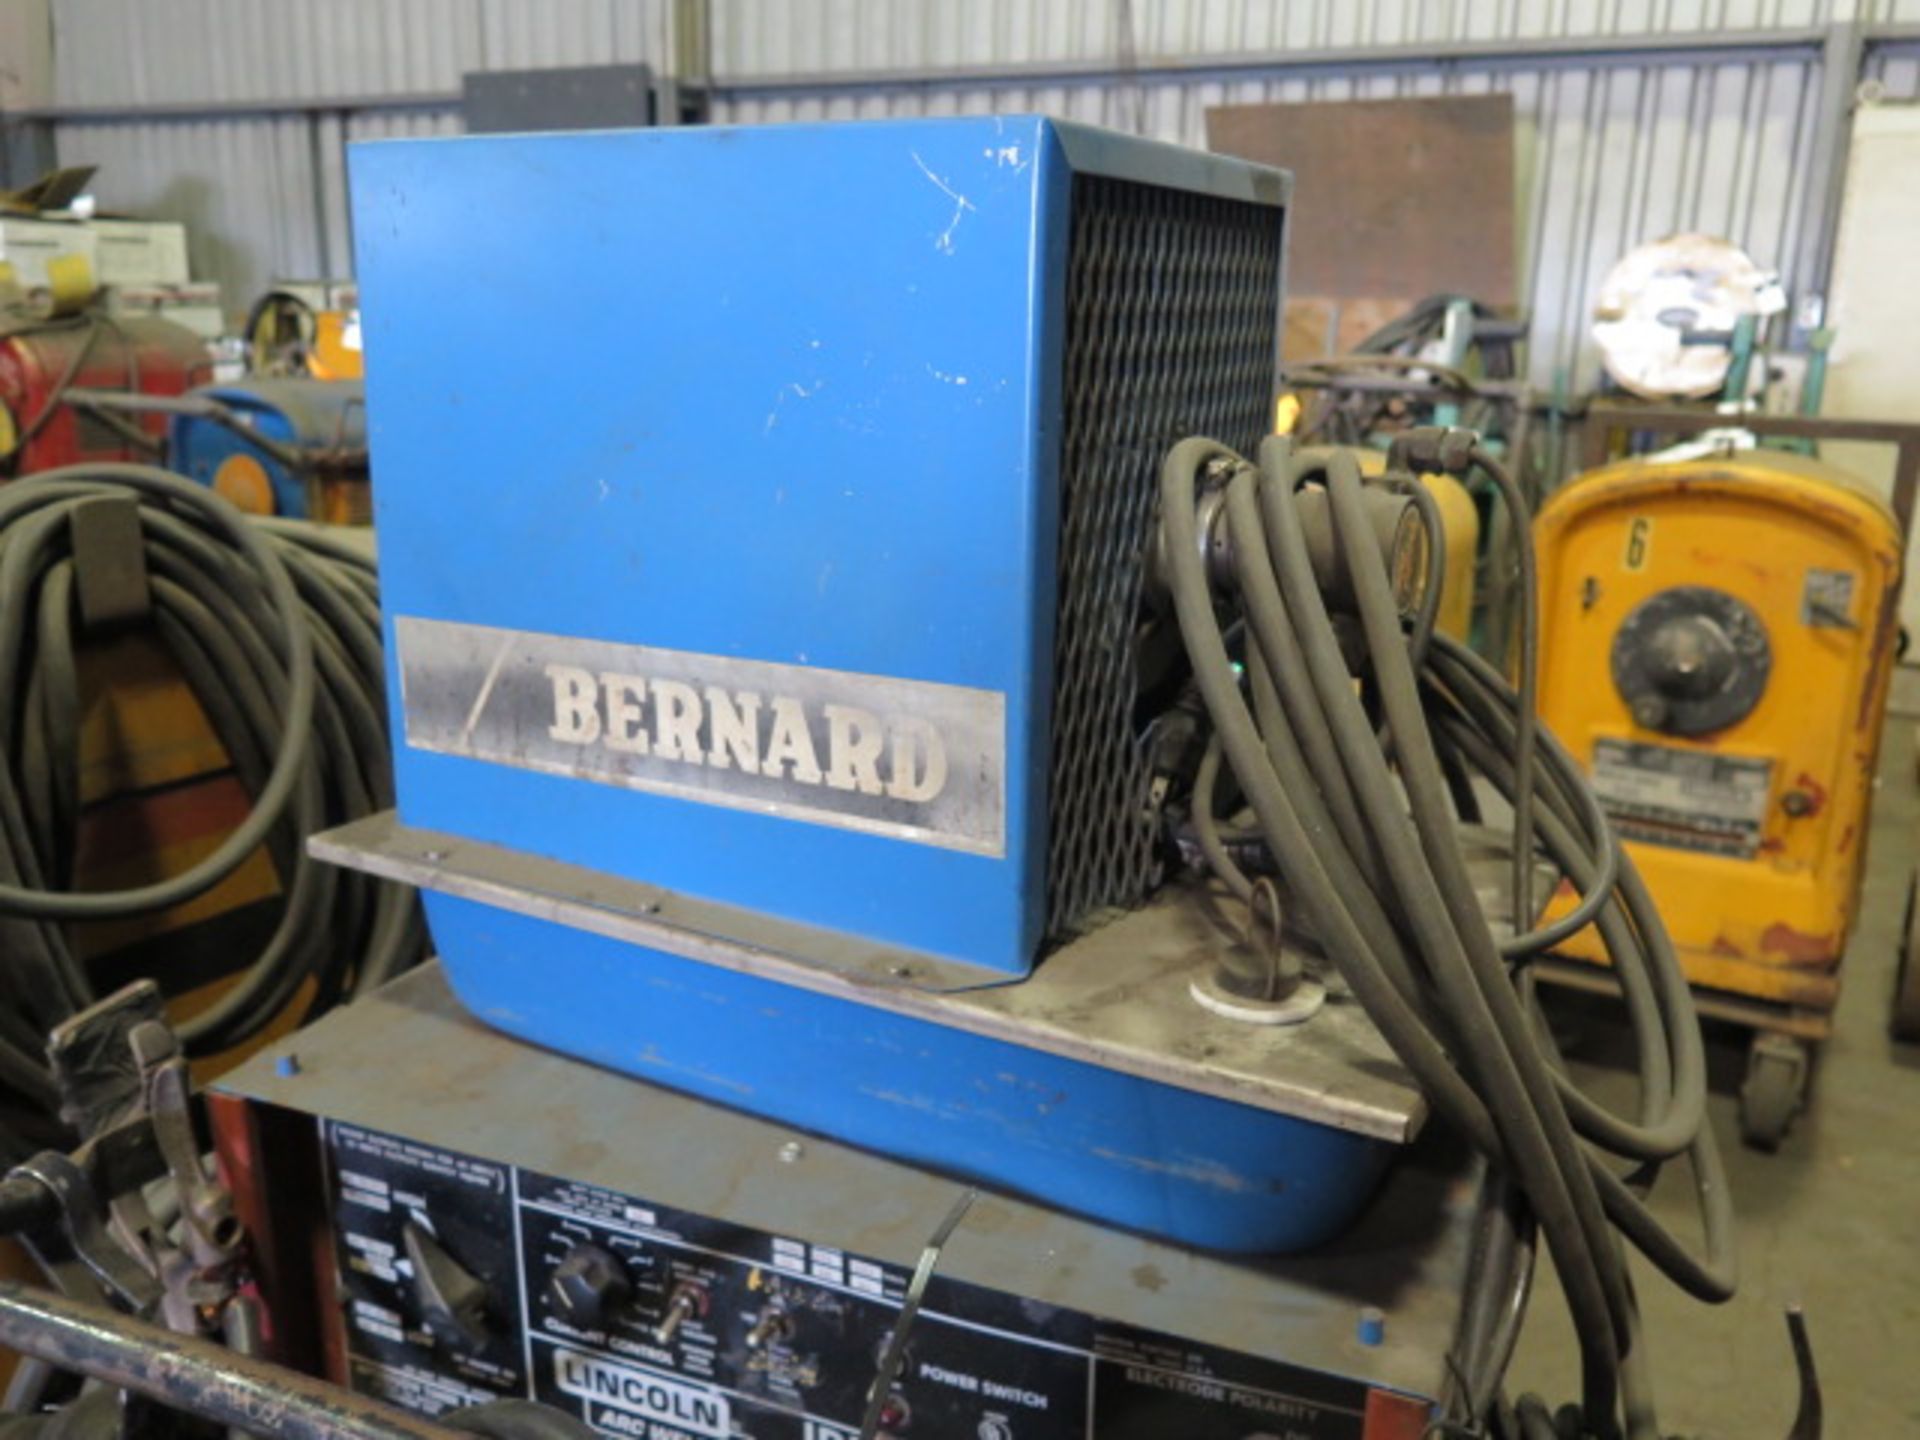 Lincoln Idealarc TIG 250/250 Arc Welding Power Source w/ Bernard Cooler (SOLD AS-IS - NO WARRANTY) - Image 7 of 10